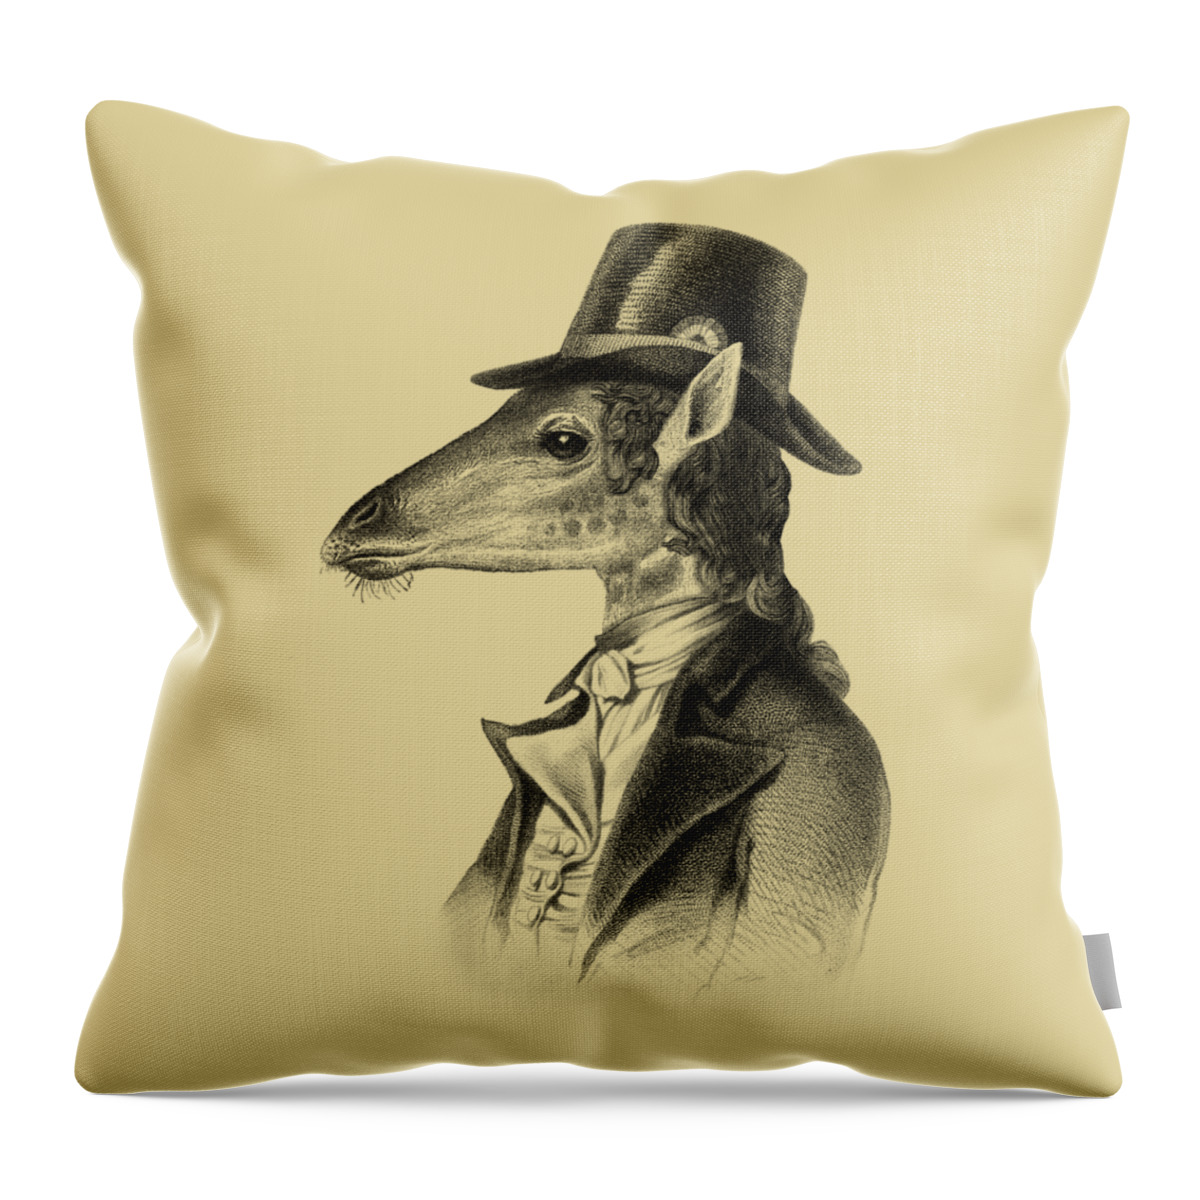 Giraffe Throw Pillow featuring the mixed media Giraffe in regency style clothes by Madame Memento